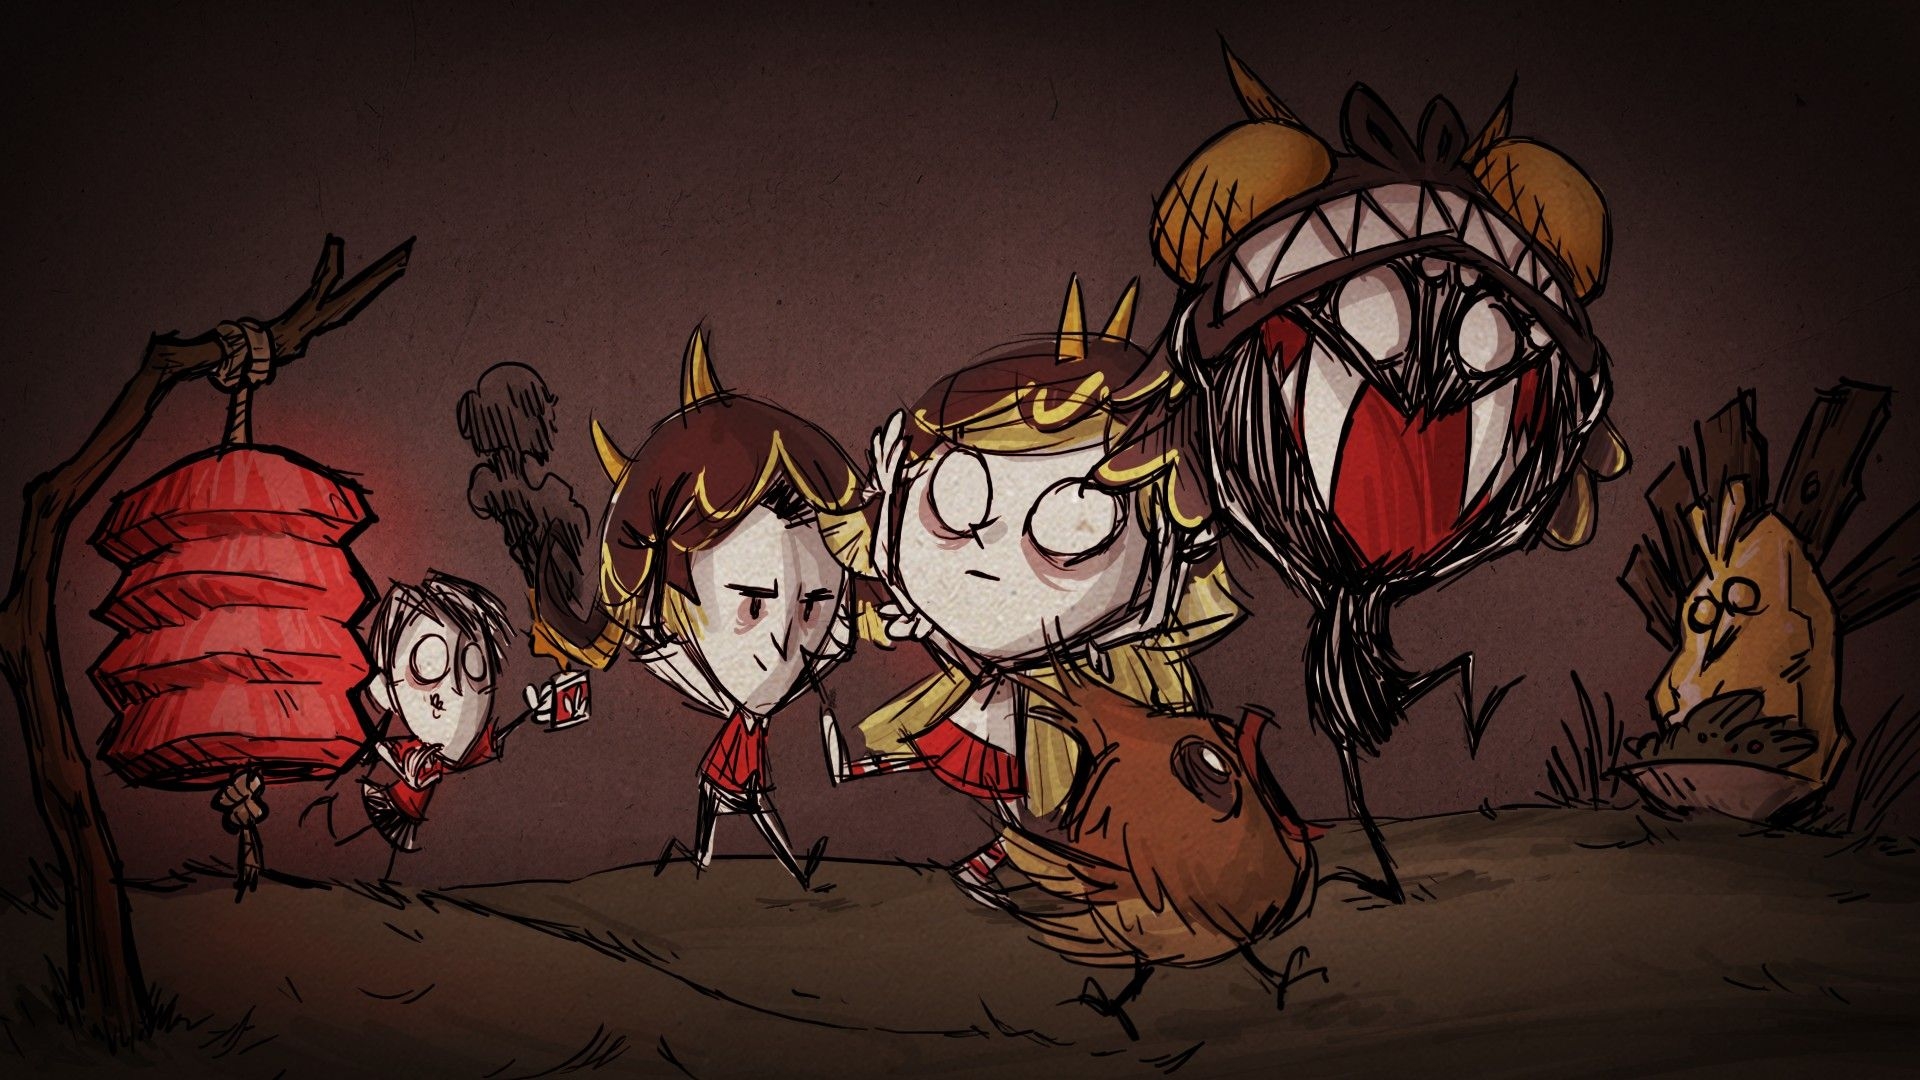 Ю донт фул. Don t Starve together. Уилер don't Starve. Don't Starve together ночь. Don't Starve together арт.